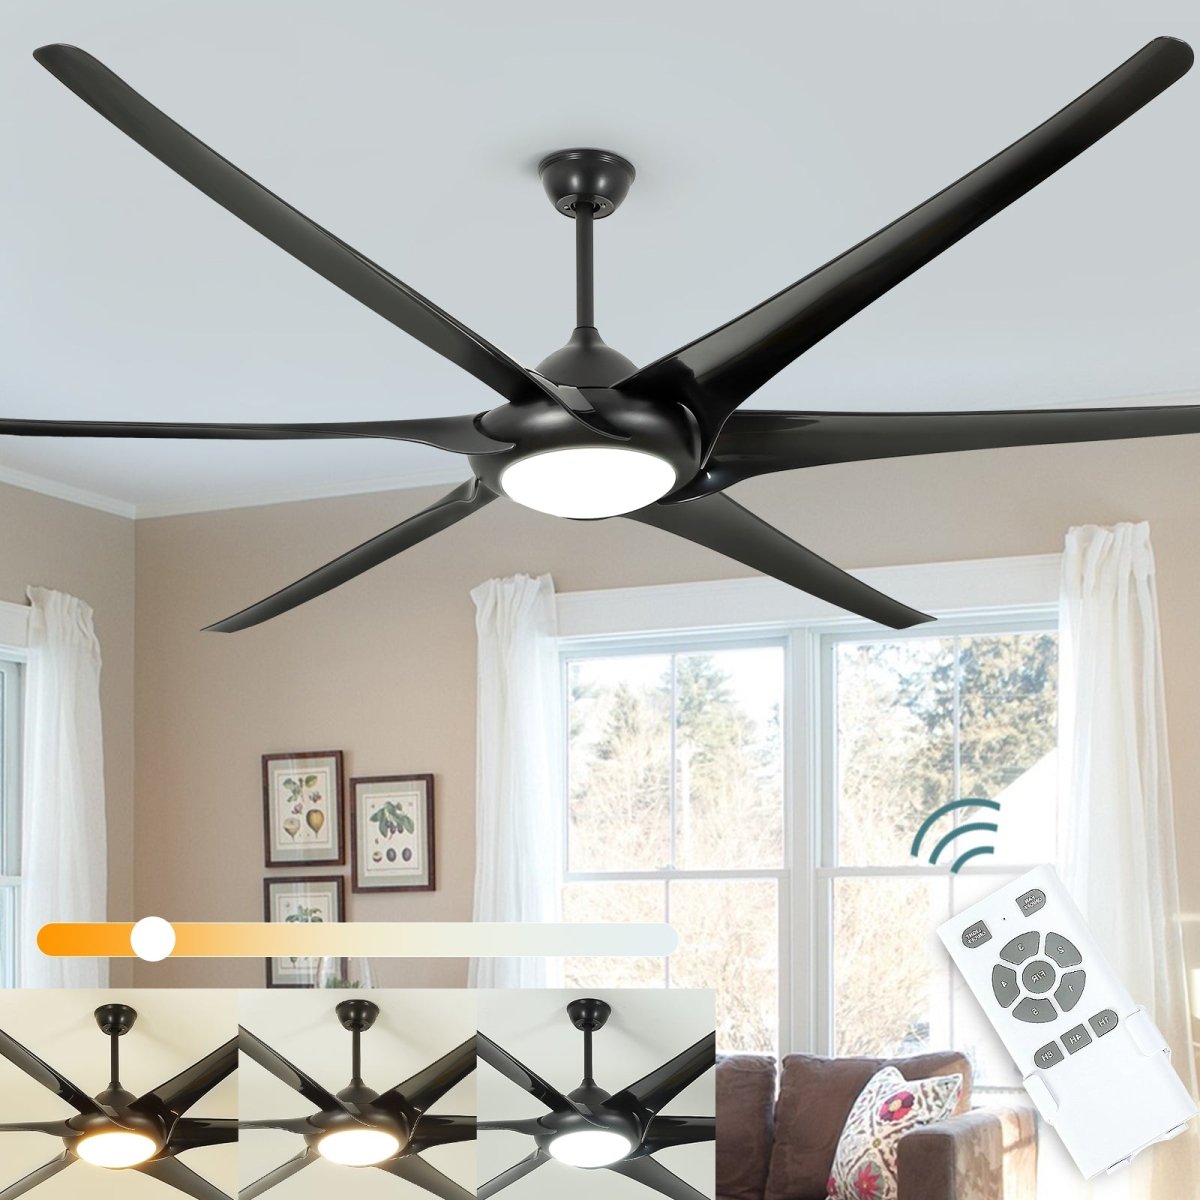 Depuley 100" Ceiling Fans with Lights and Remote, Large Black Ceiling Fan with Light LED, Modern Reversible Ceiling Fan with 5-Speed for Office & Covered Outdoor, Color Changeable 3000K-6000K, Timer - WS-FPZ34-24B 1 | DEPULEY